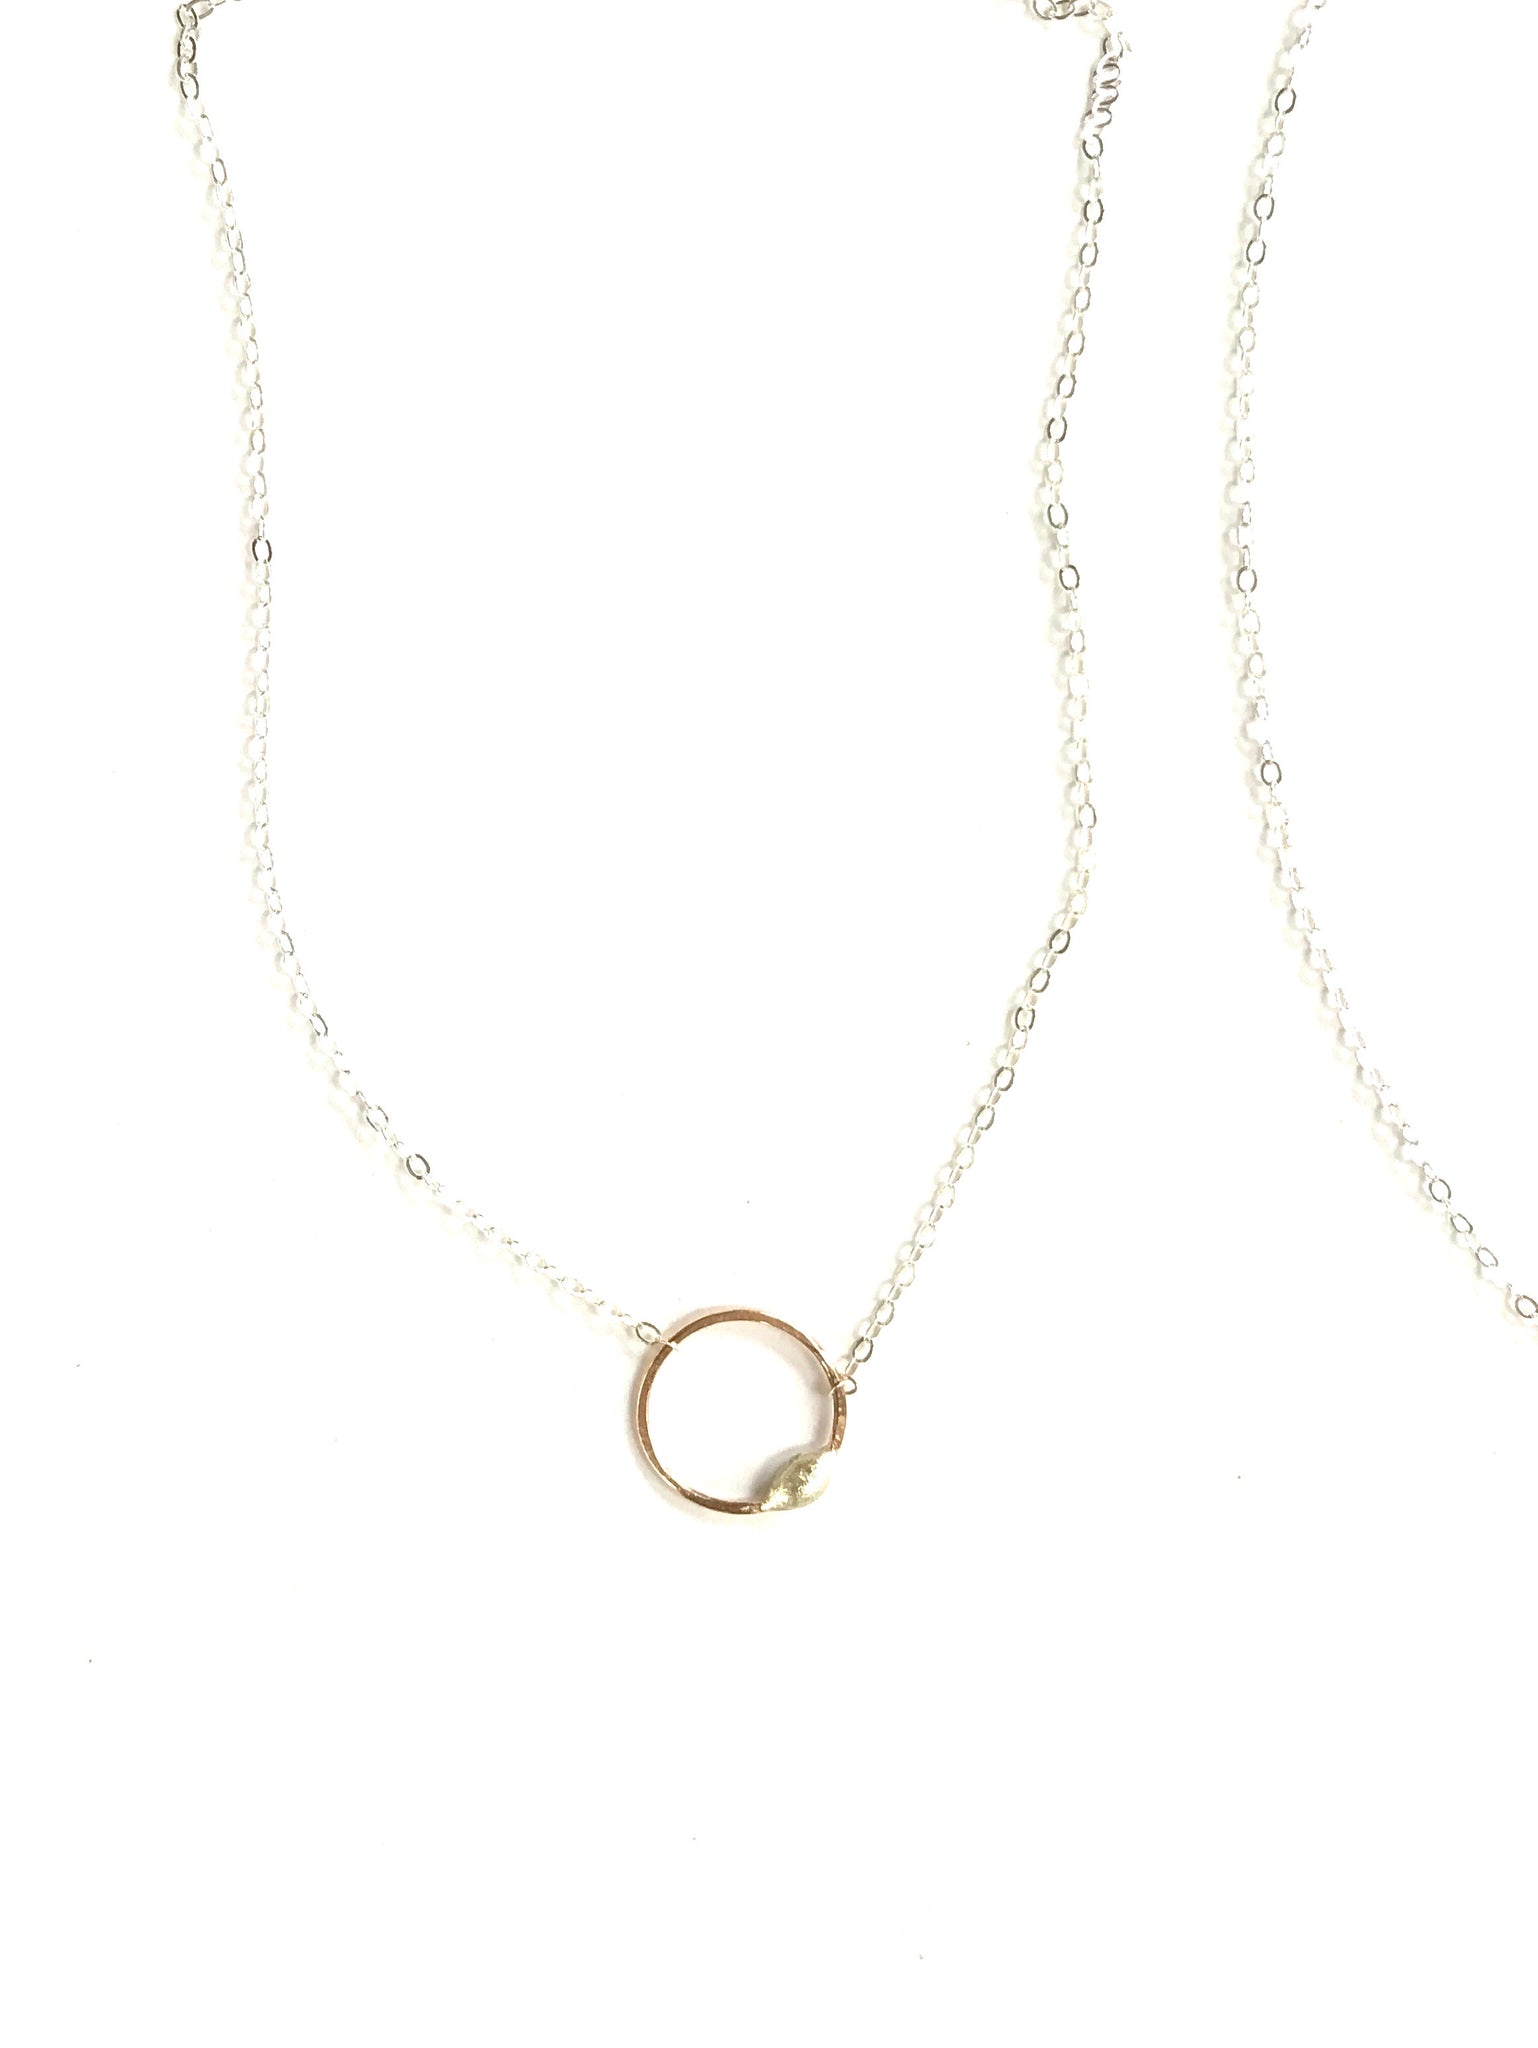 Gold and Silver - necklace